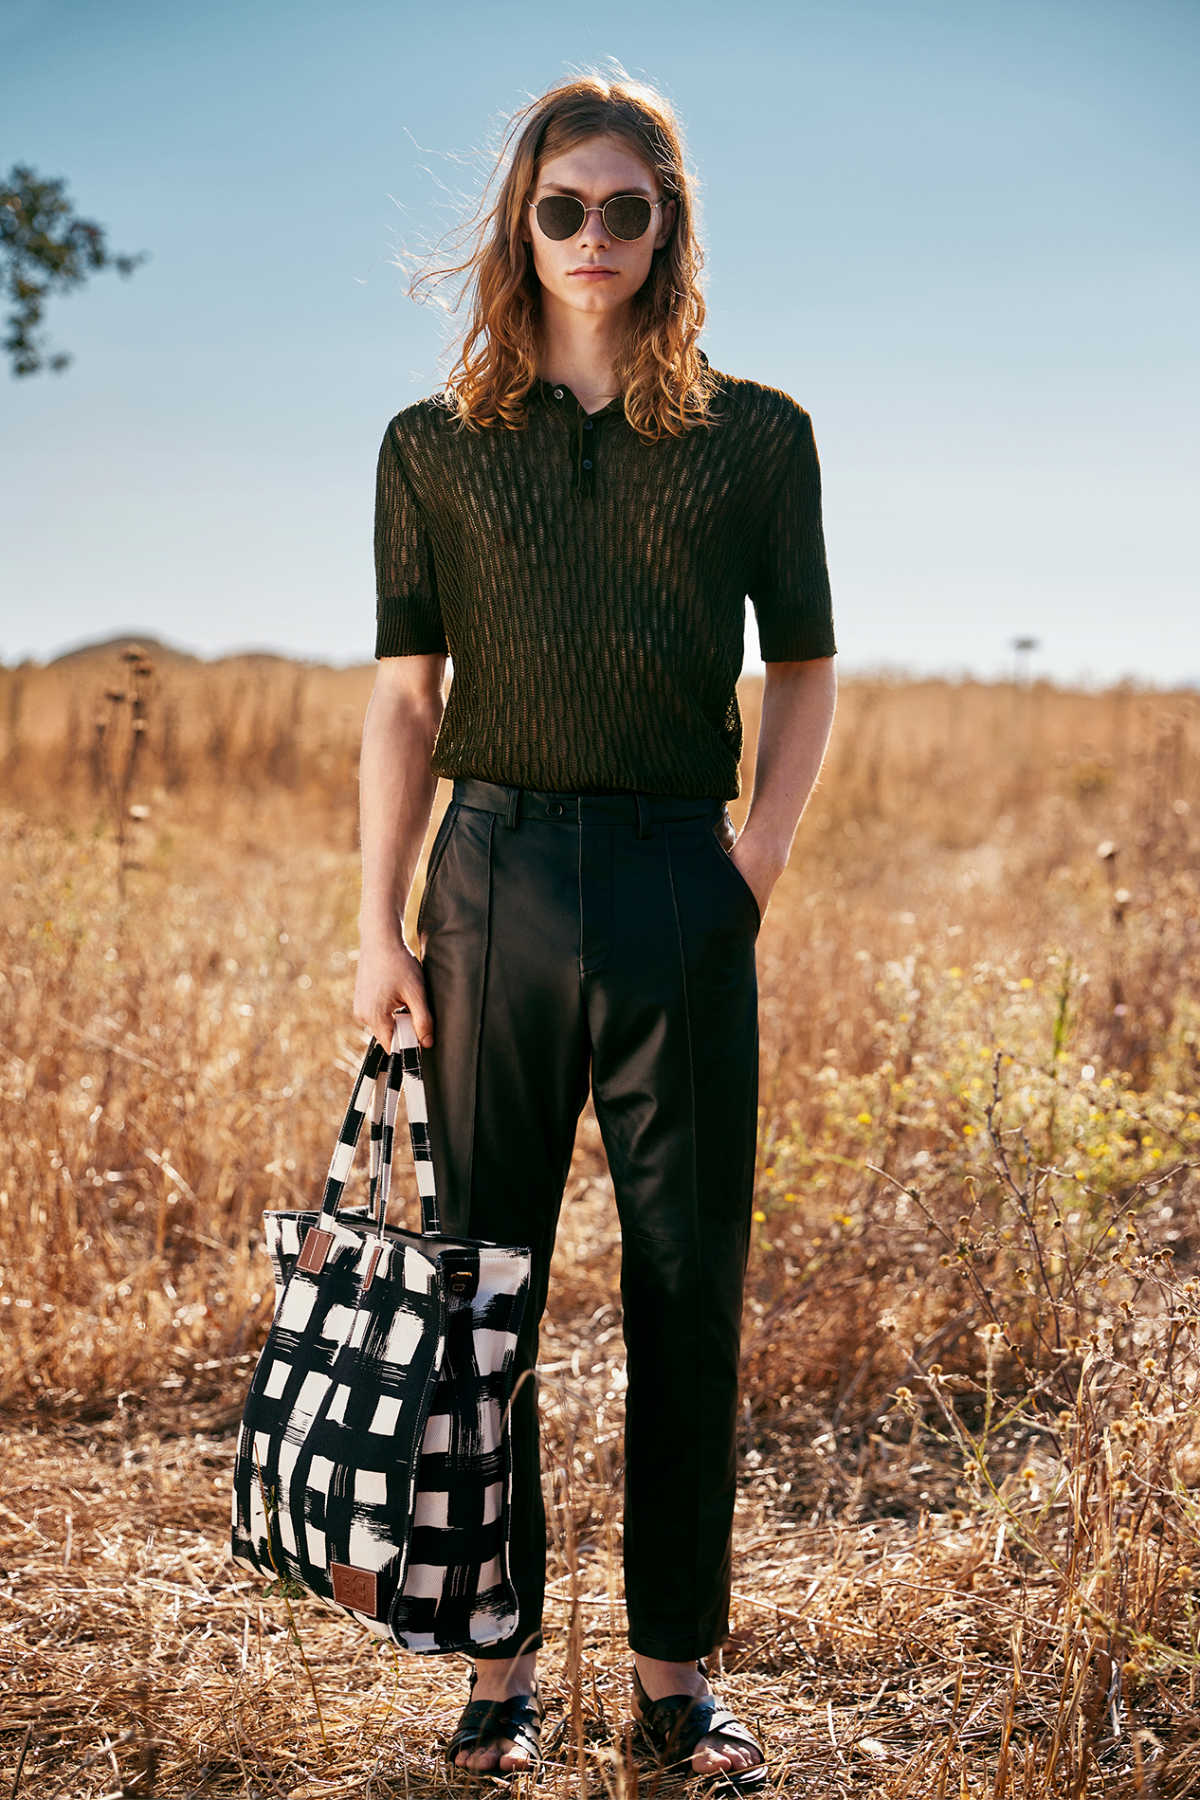 Bally Presents its Spring / Summer 2021 Collection - Elemental Balance